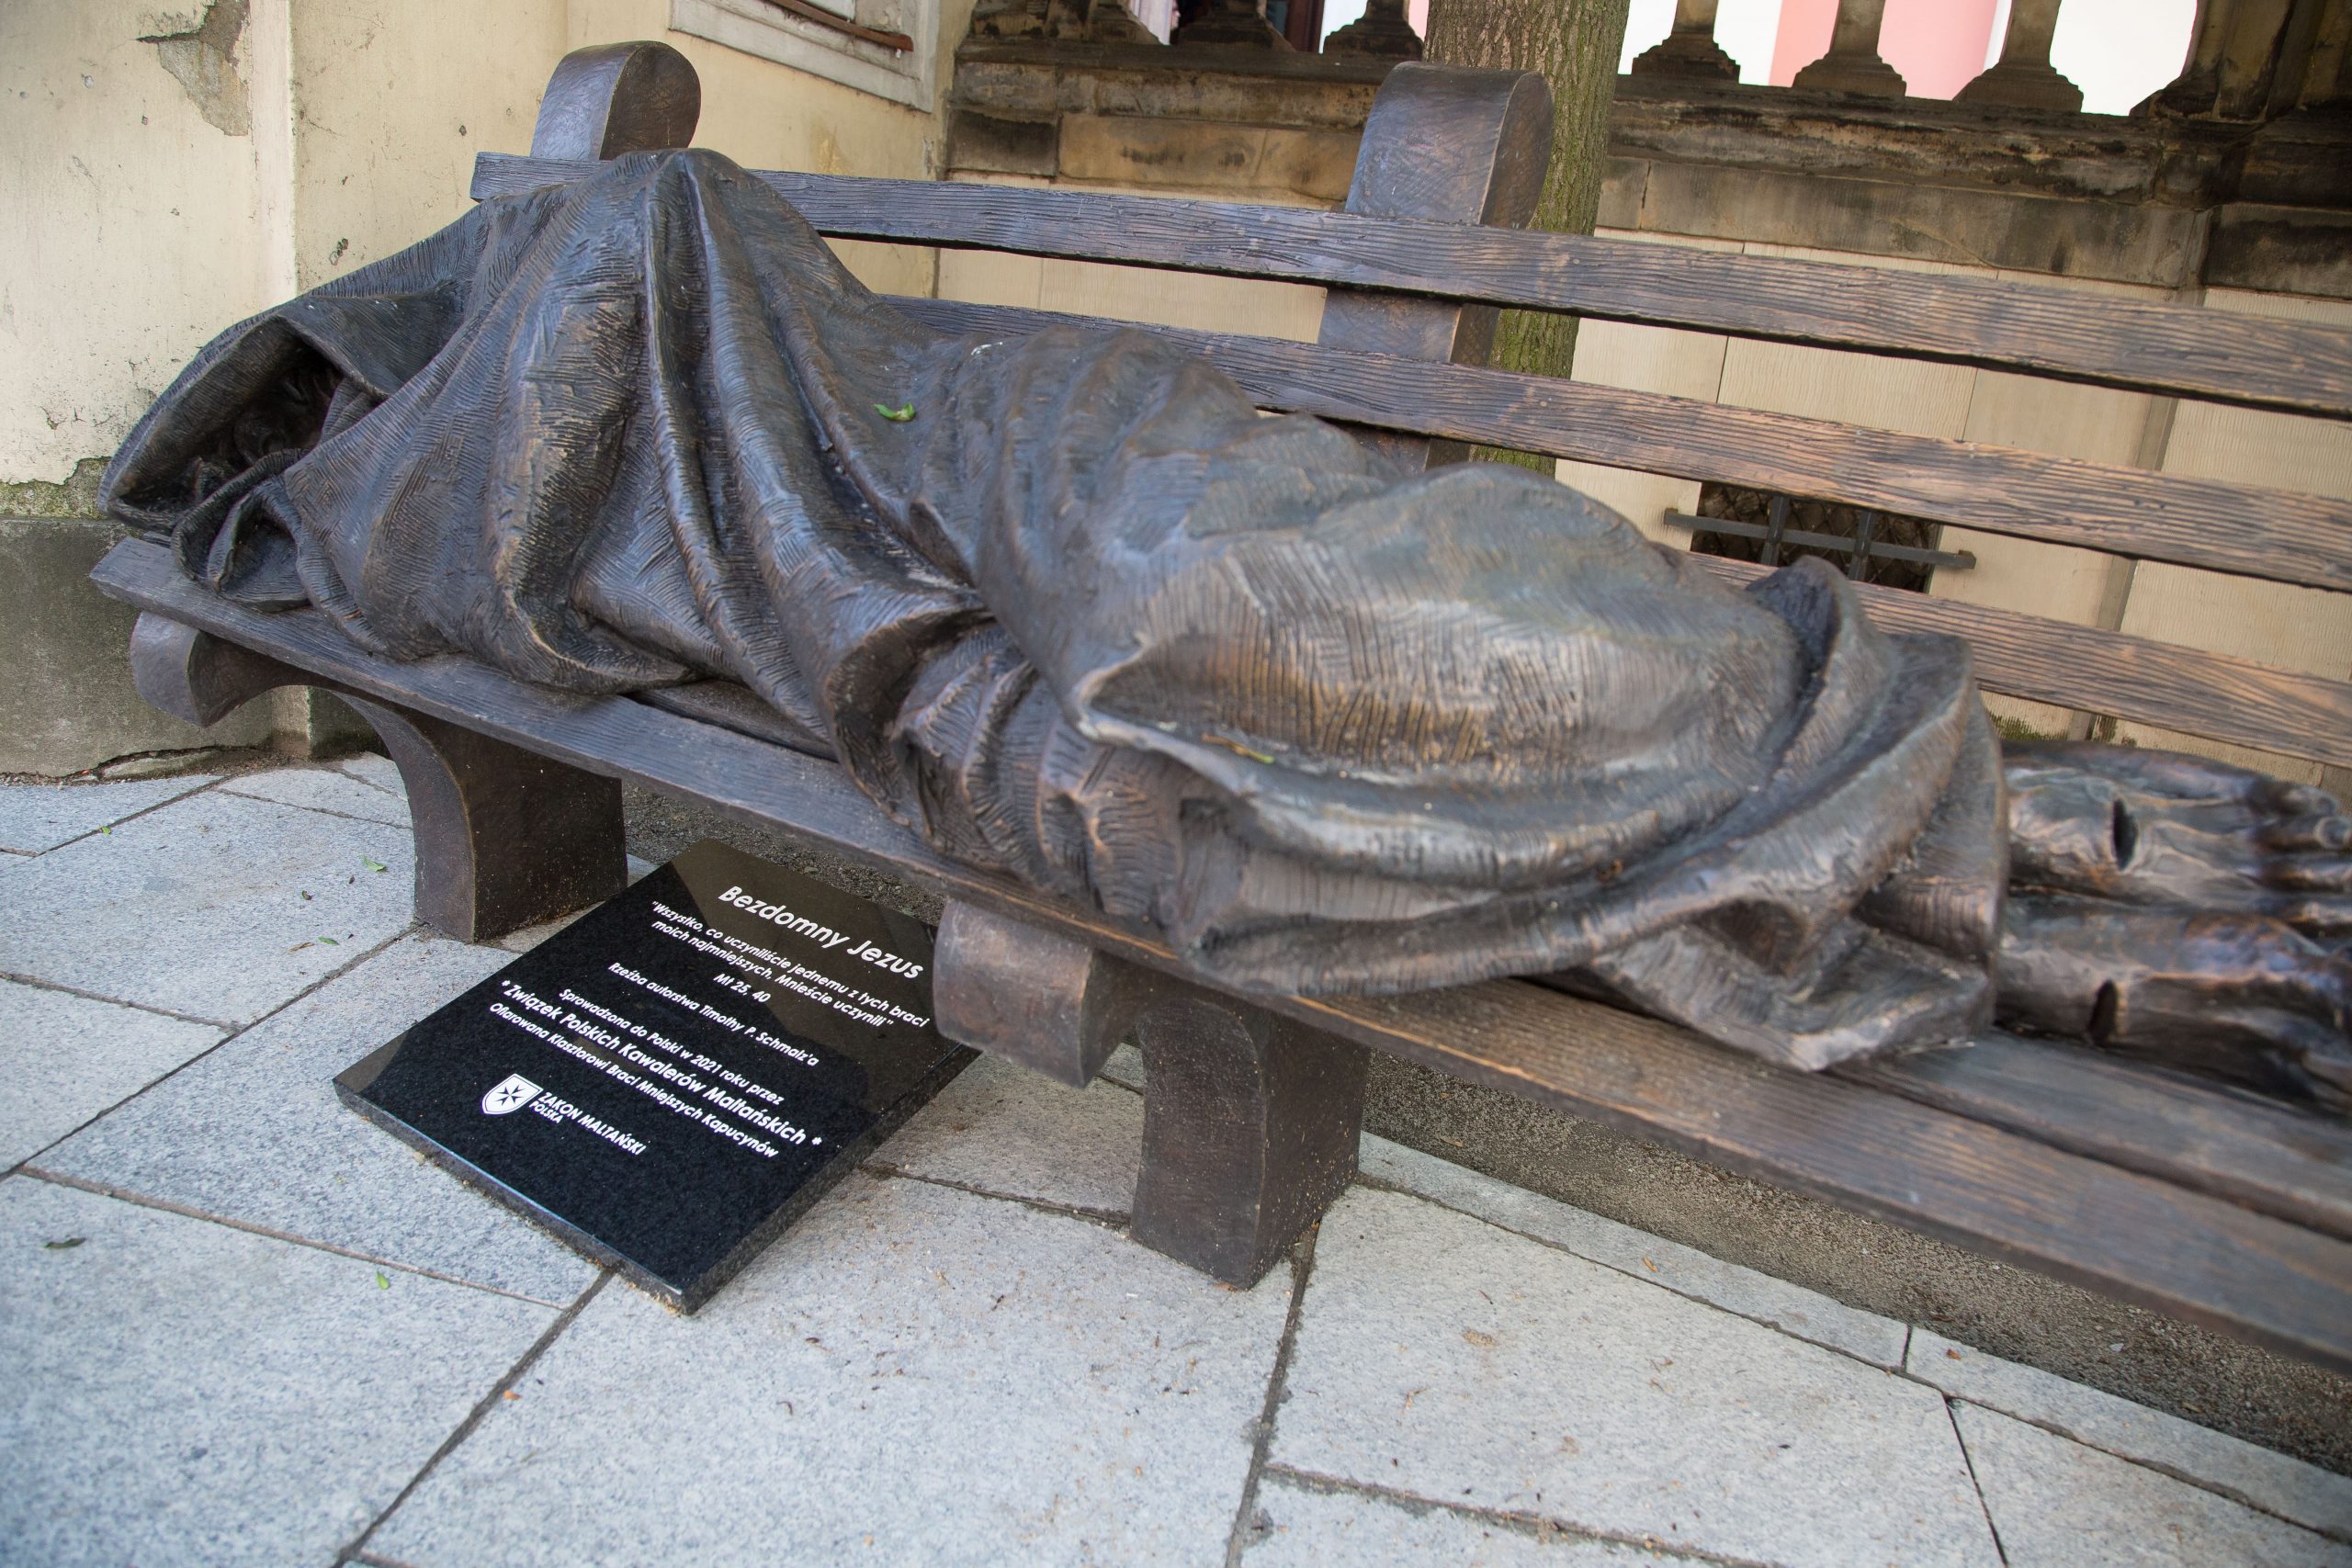 Unveiling of the Homeless Jesus Sculpture